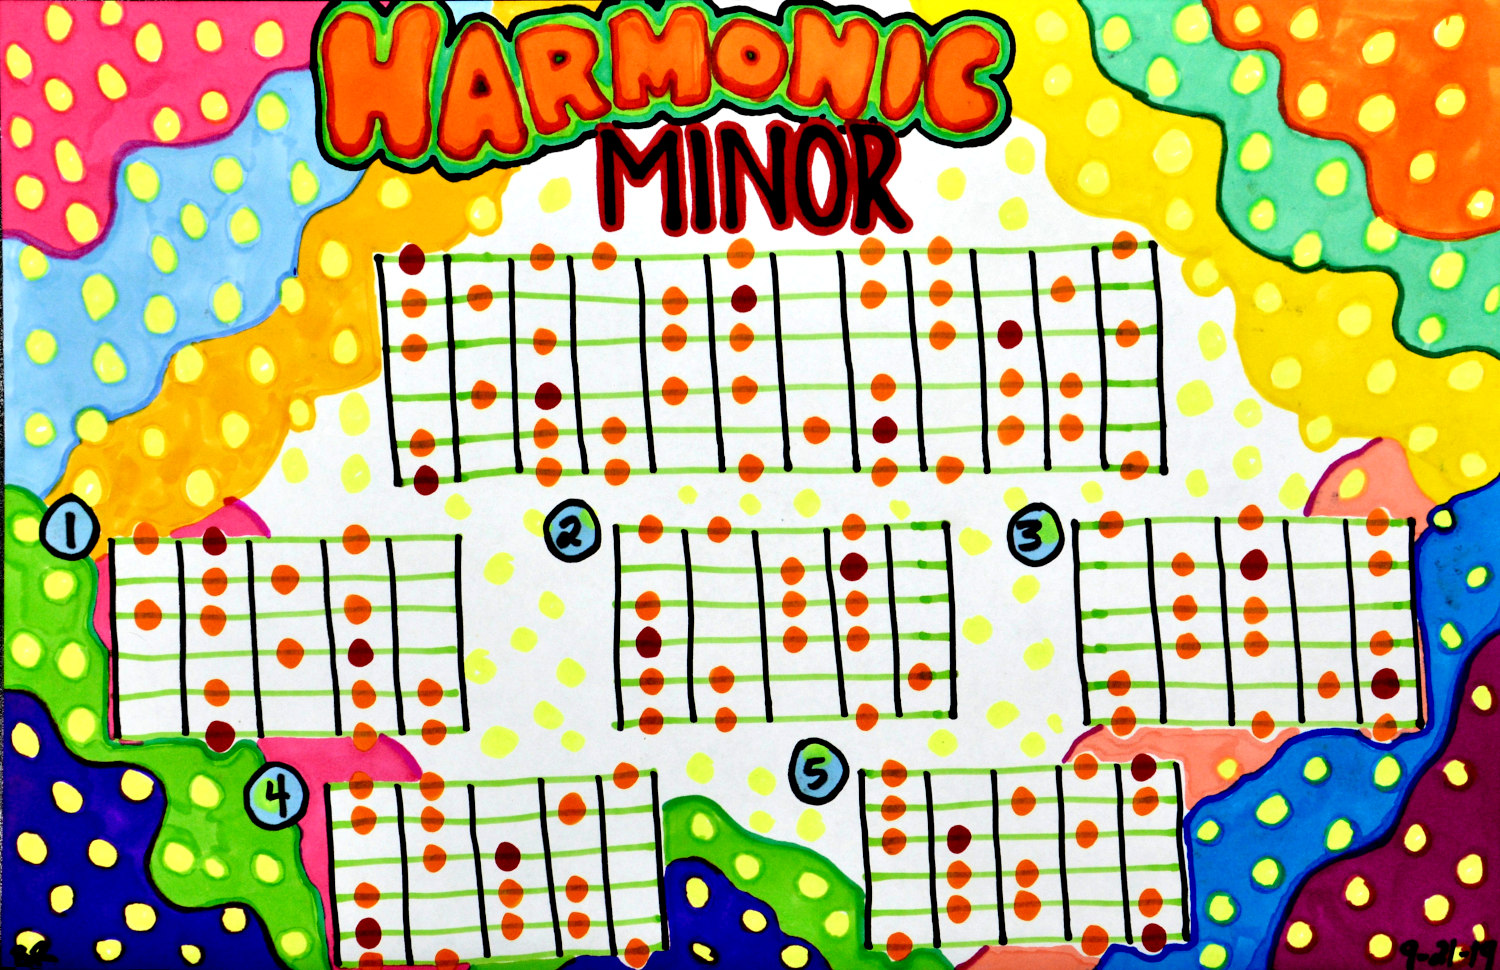 Harmonic Minor guitar scale drawing, by Billy Reiter